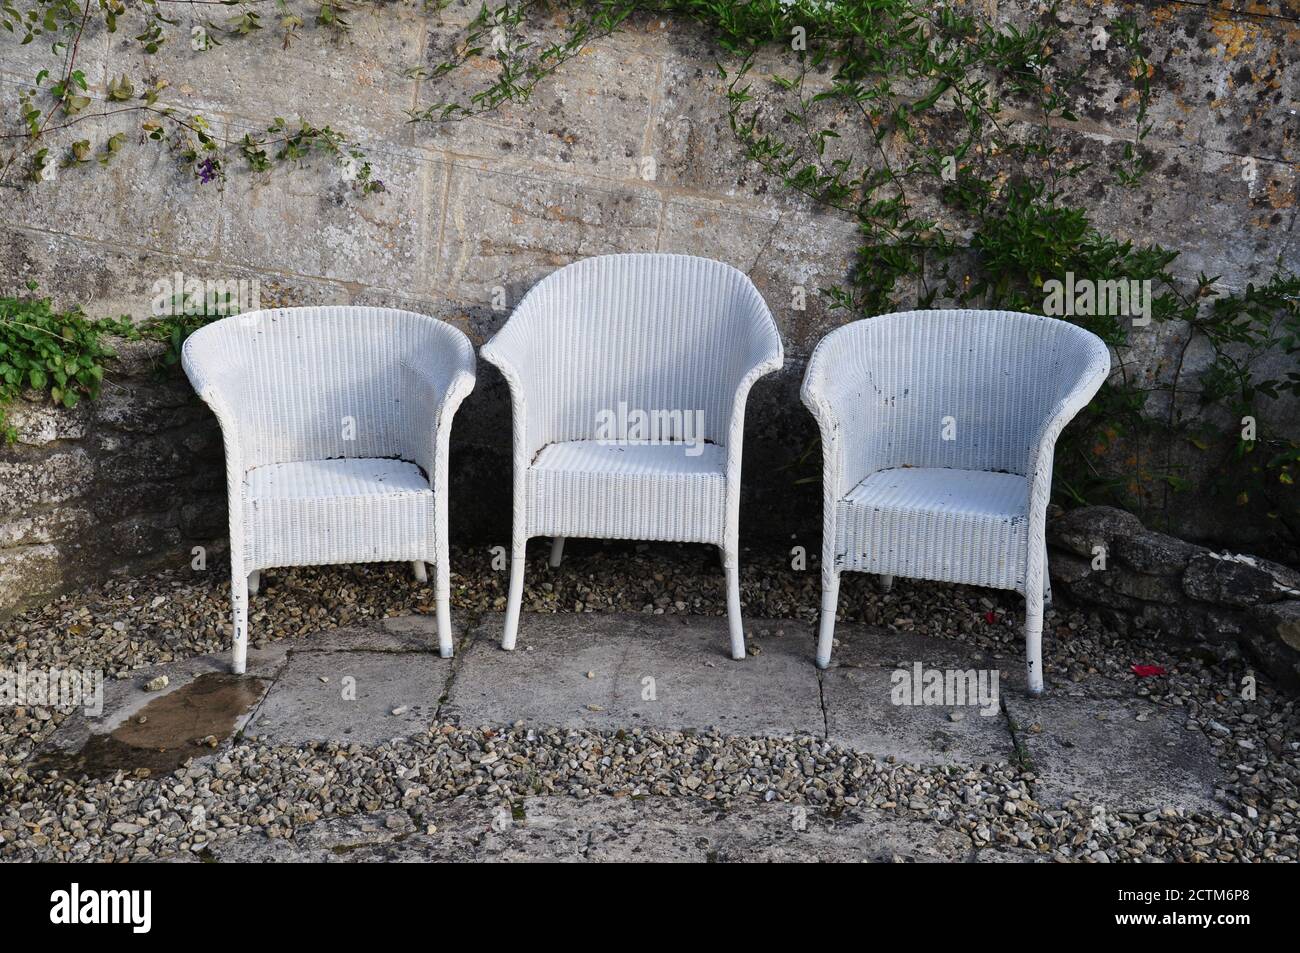 A row of three white wicker Lloyd Loom chairs in a sunken patio of stone chippings and a retaining stone wall in an English country garden. Stock Photo